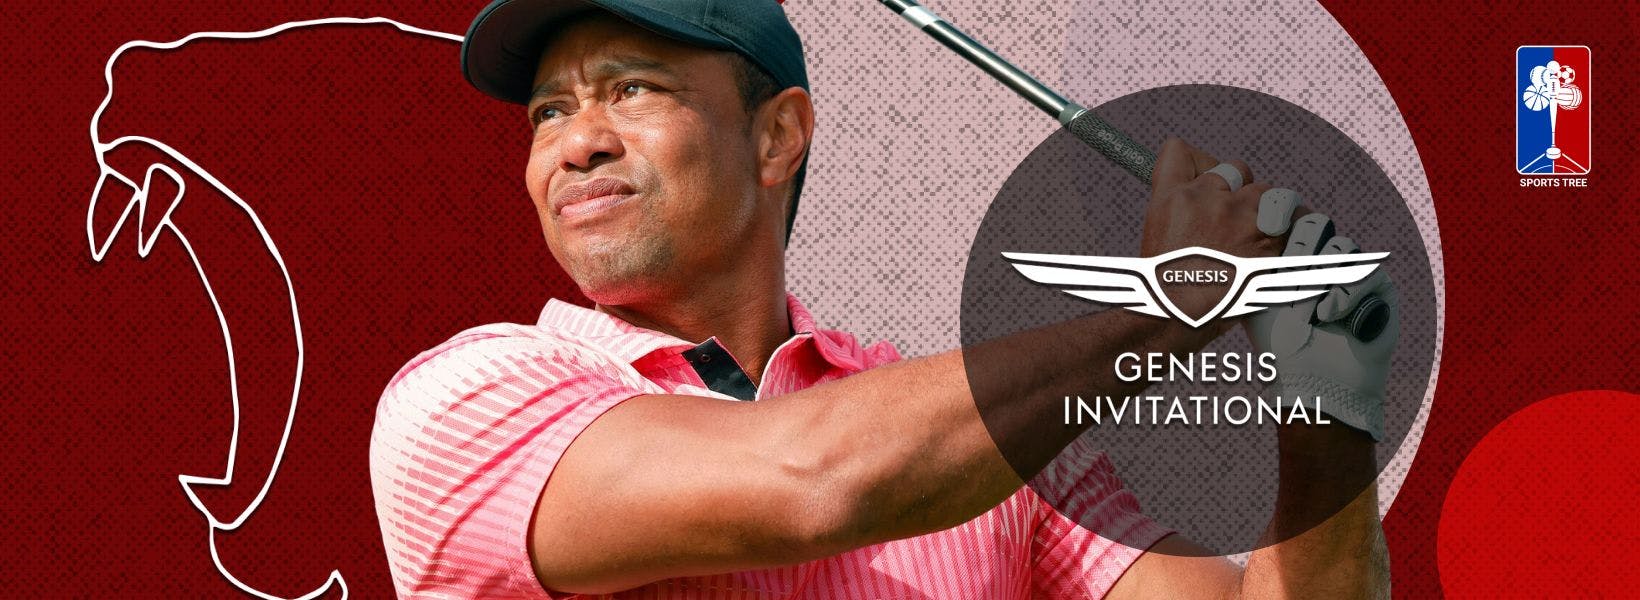 Tiger Woods announces return to Golf